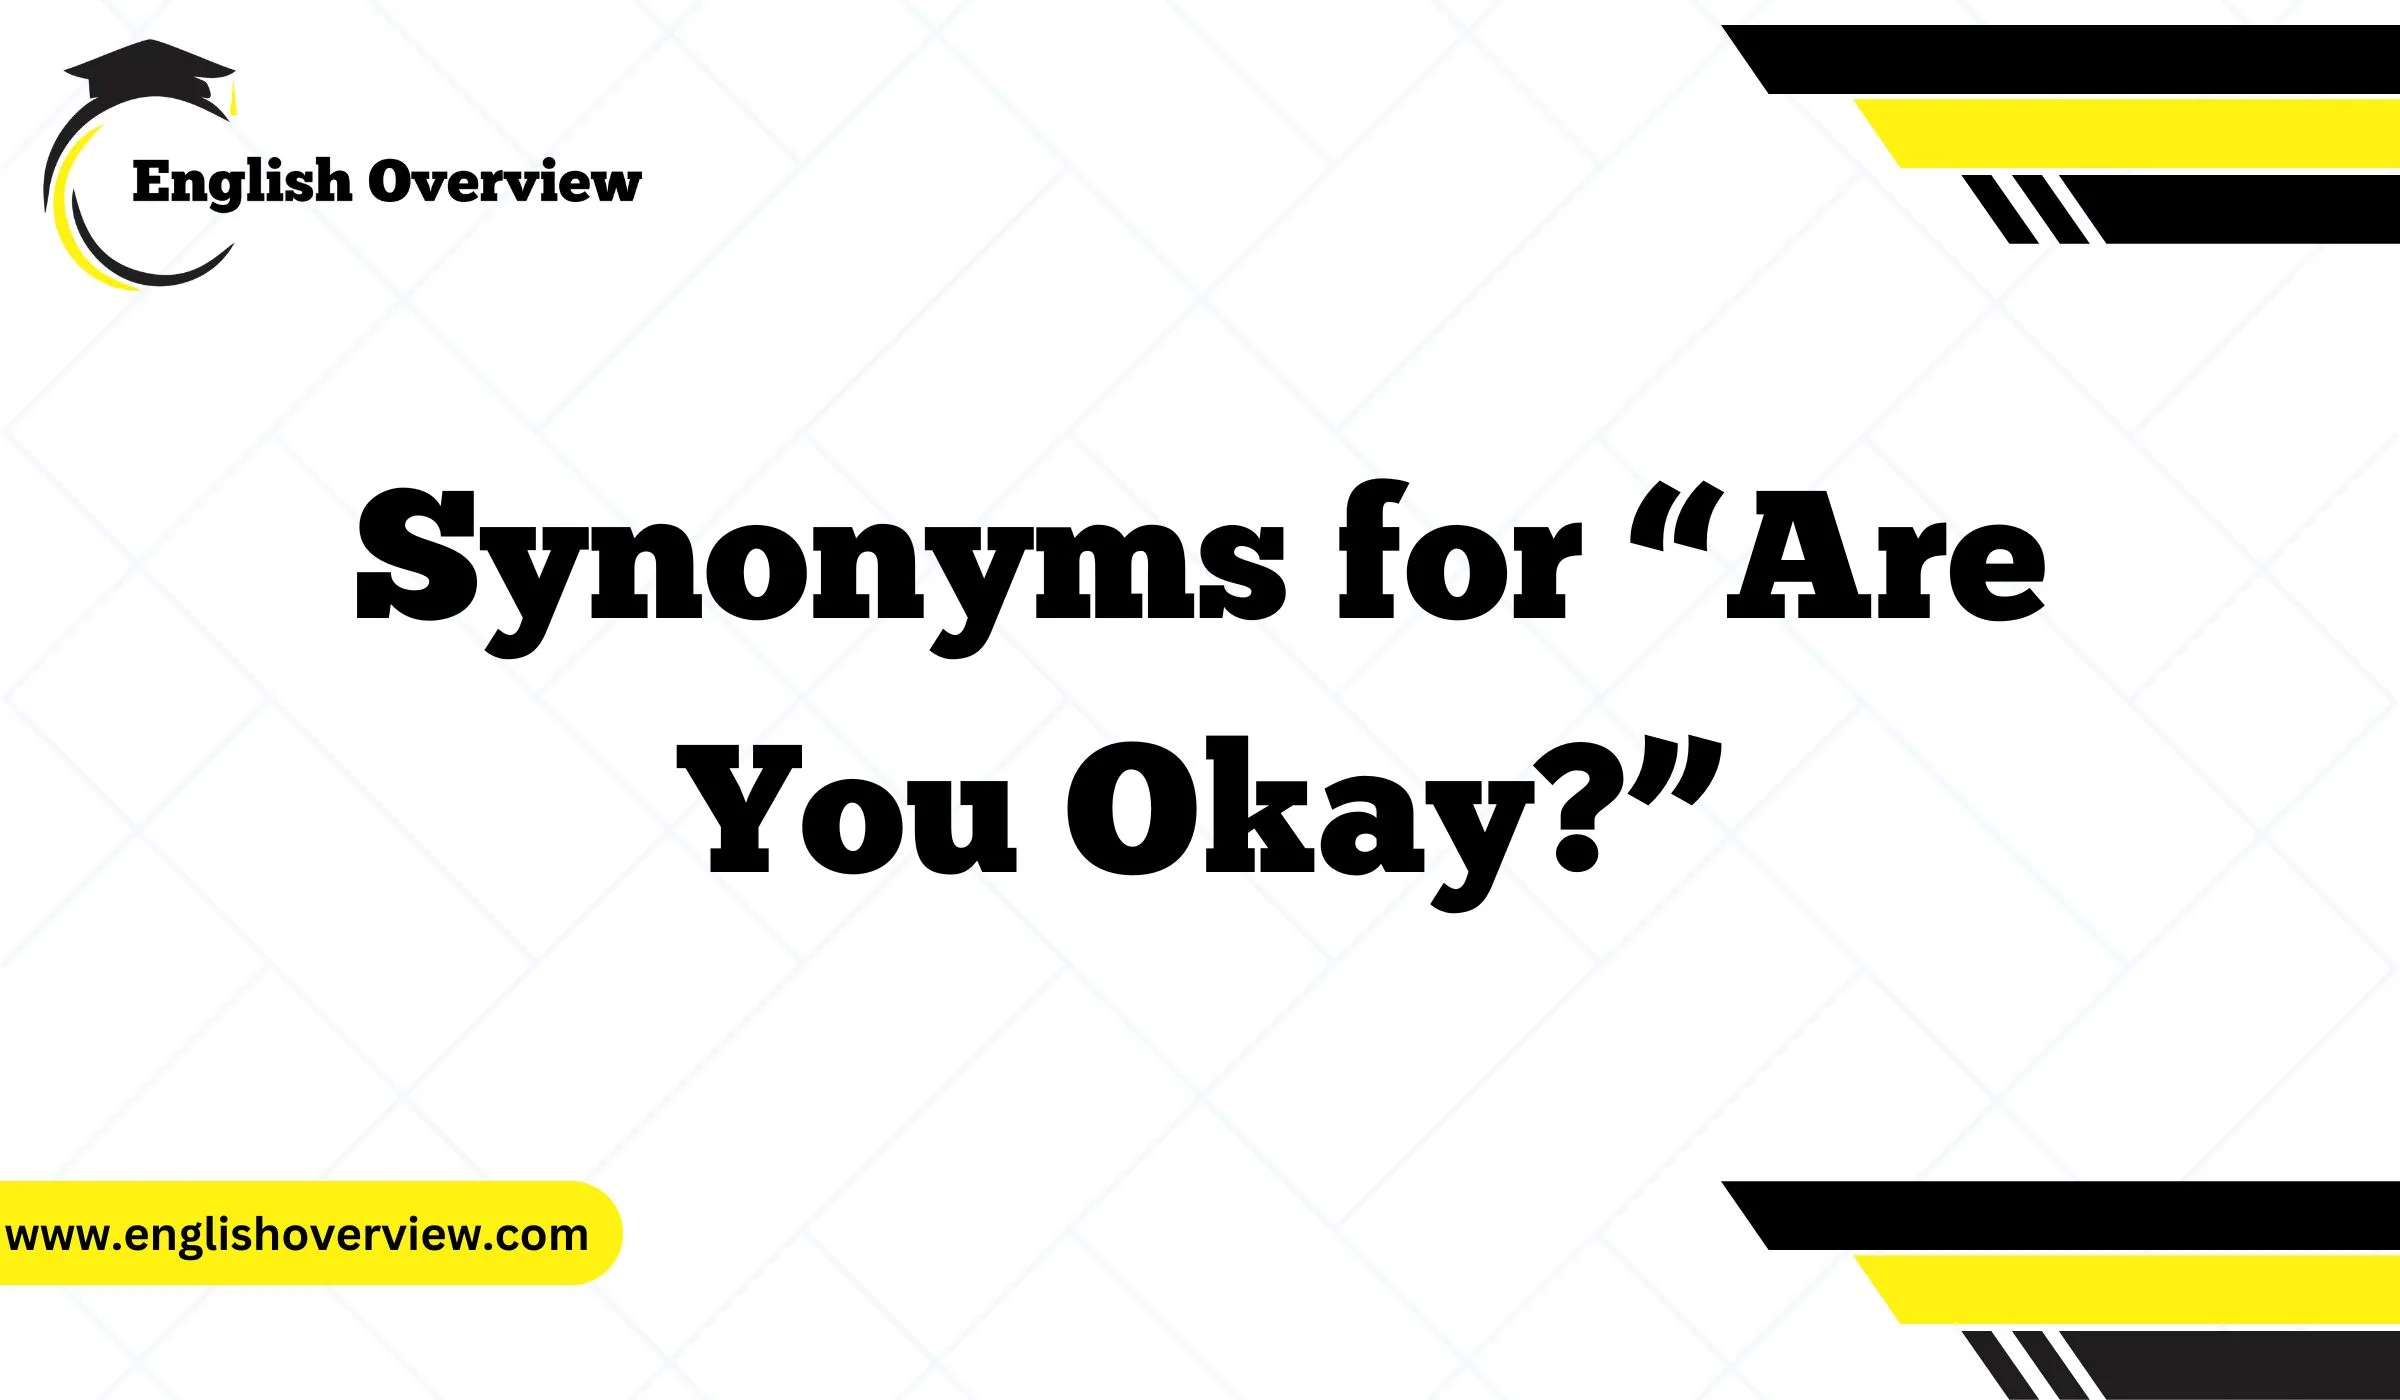 20 Synonyms for “Are You Okay?”